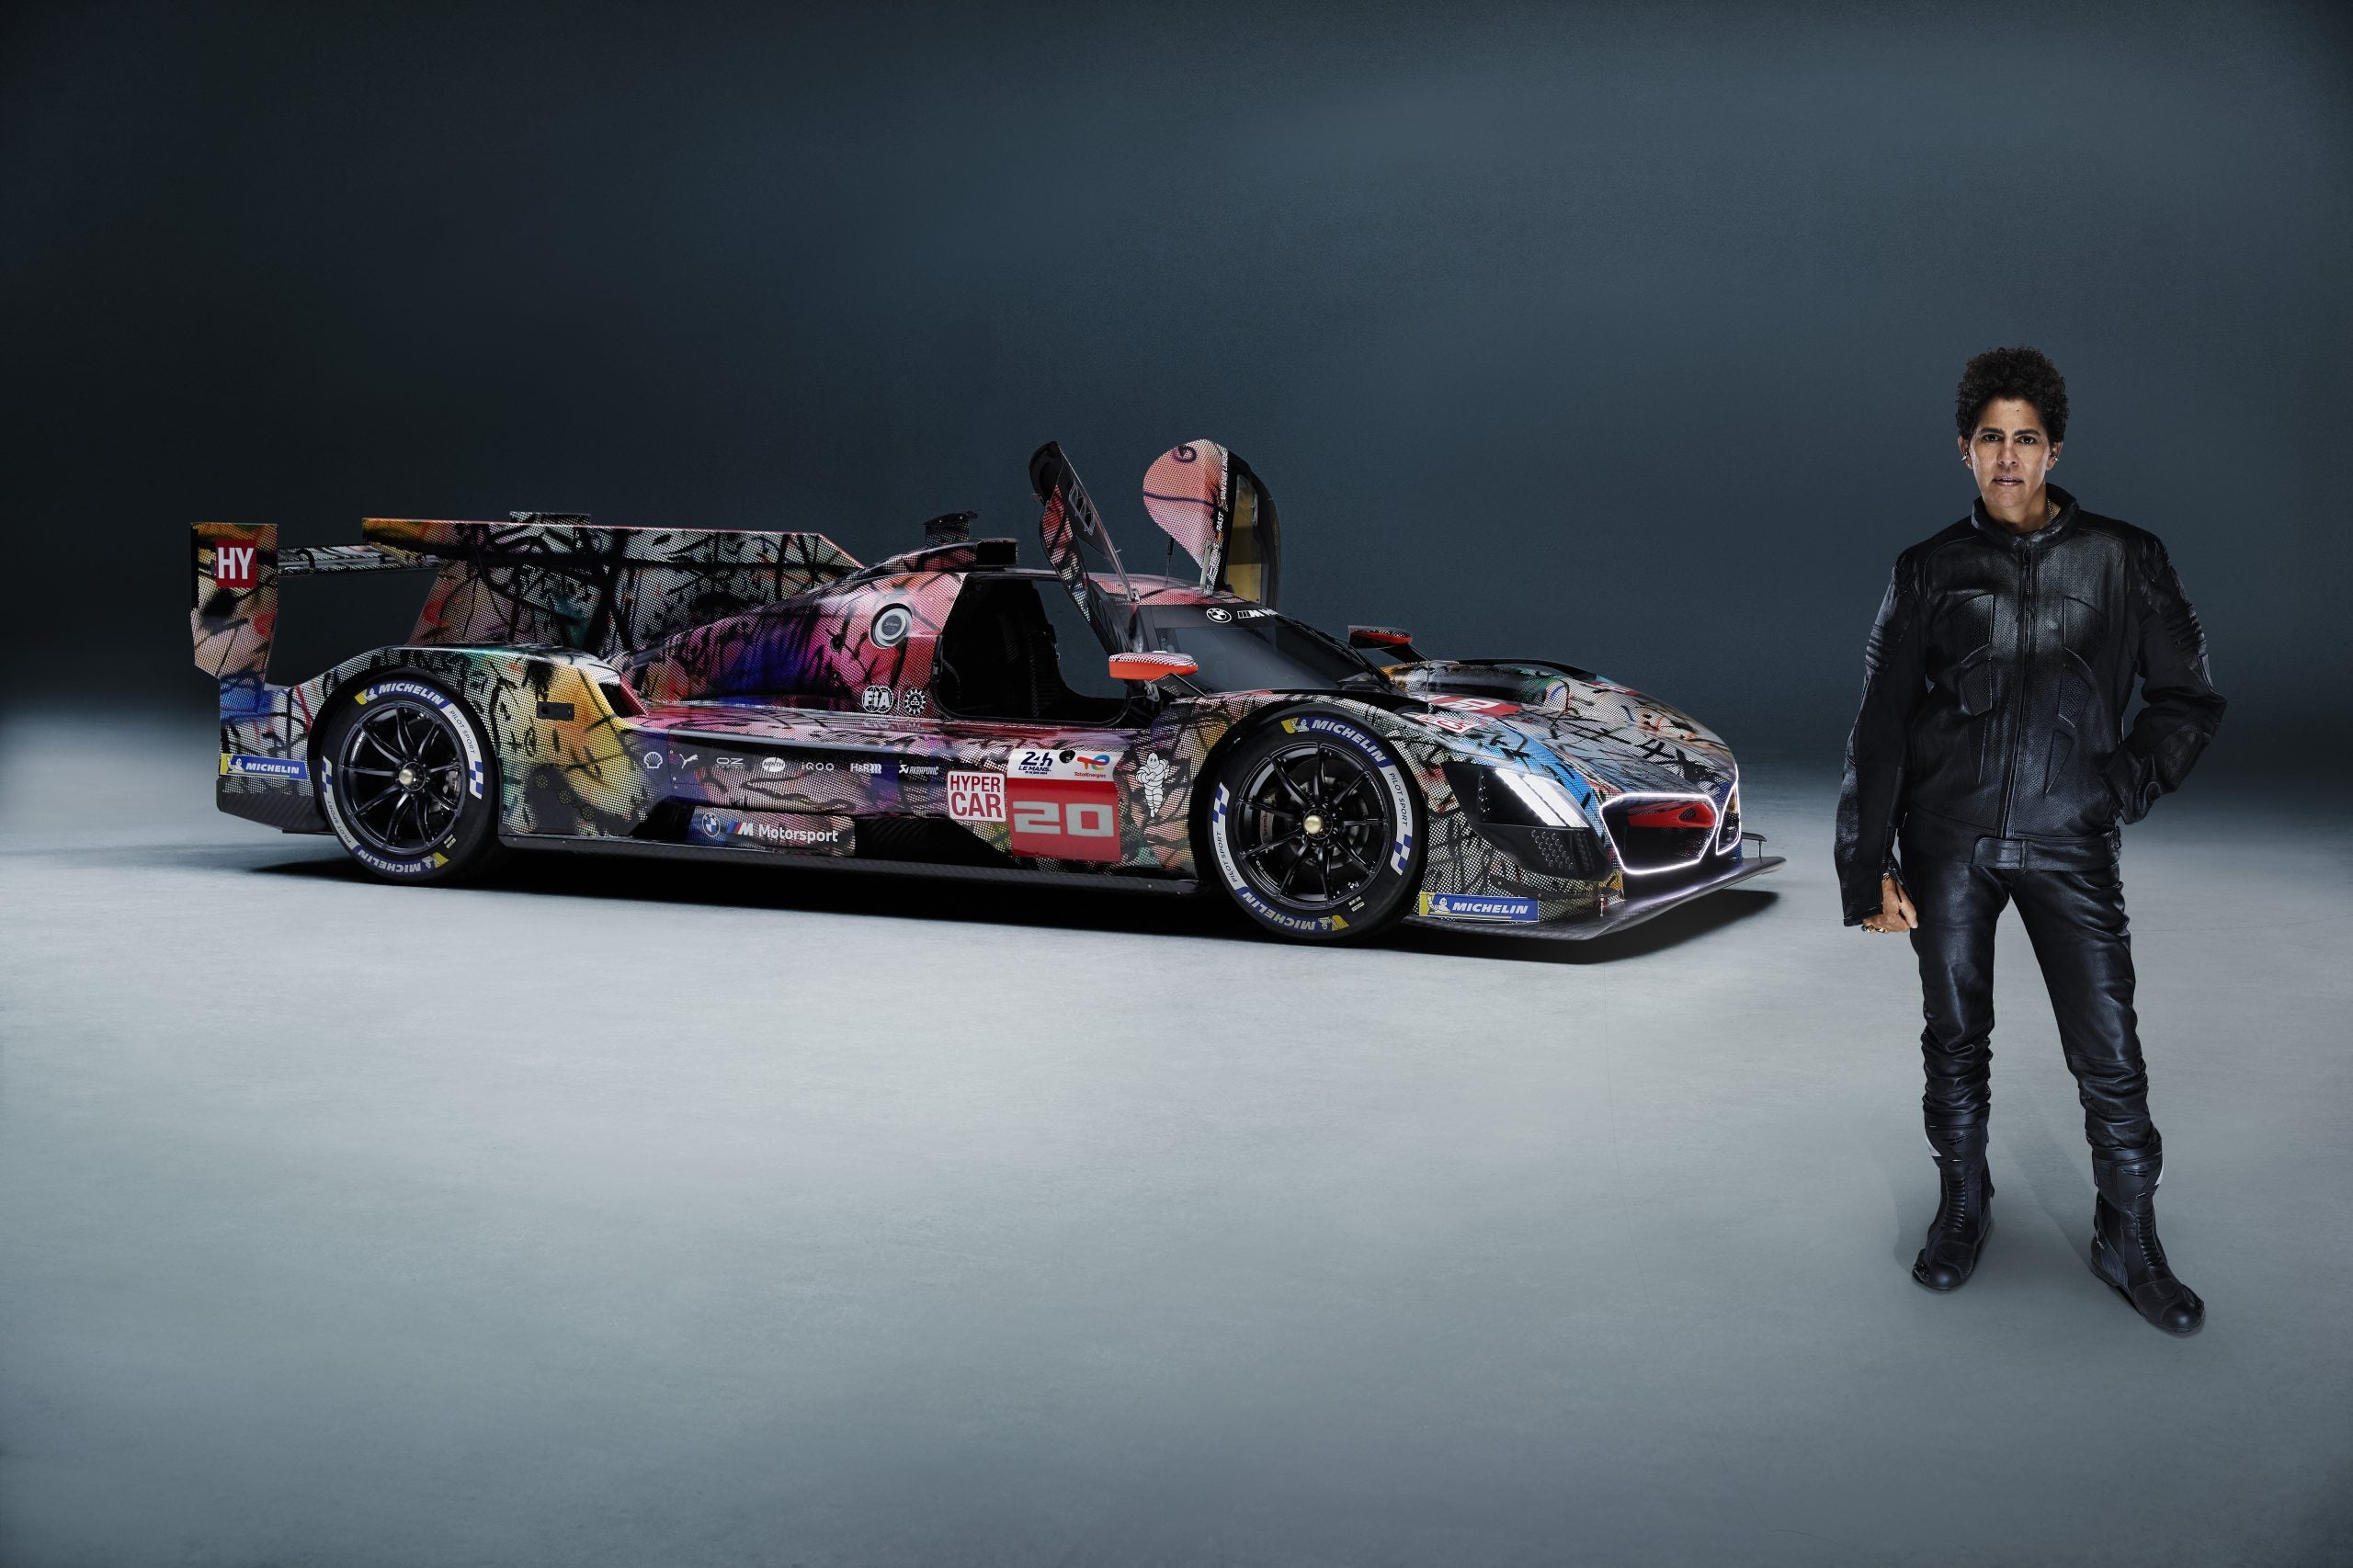 This Ethiopian Artist Designed The Latest BMW Art Car For One Of The Biggest Motorsport Races In The World